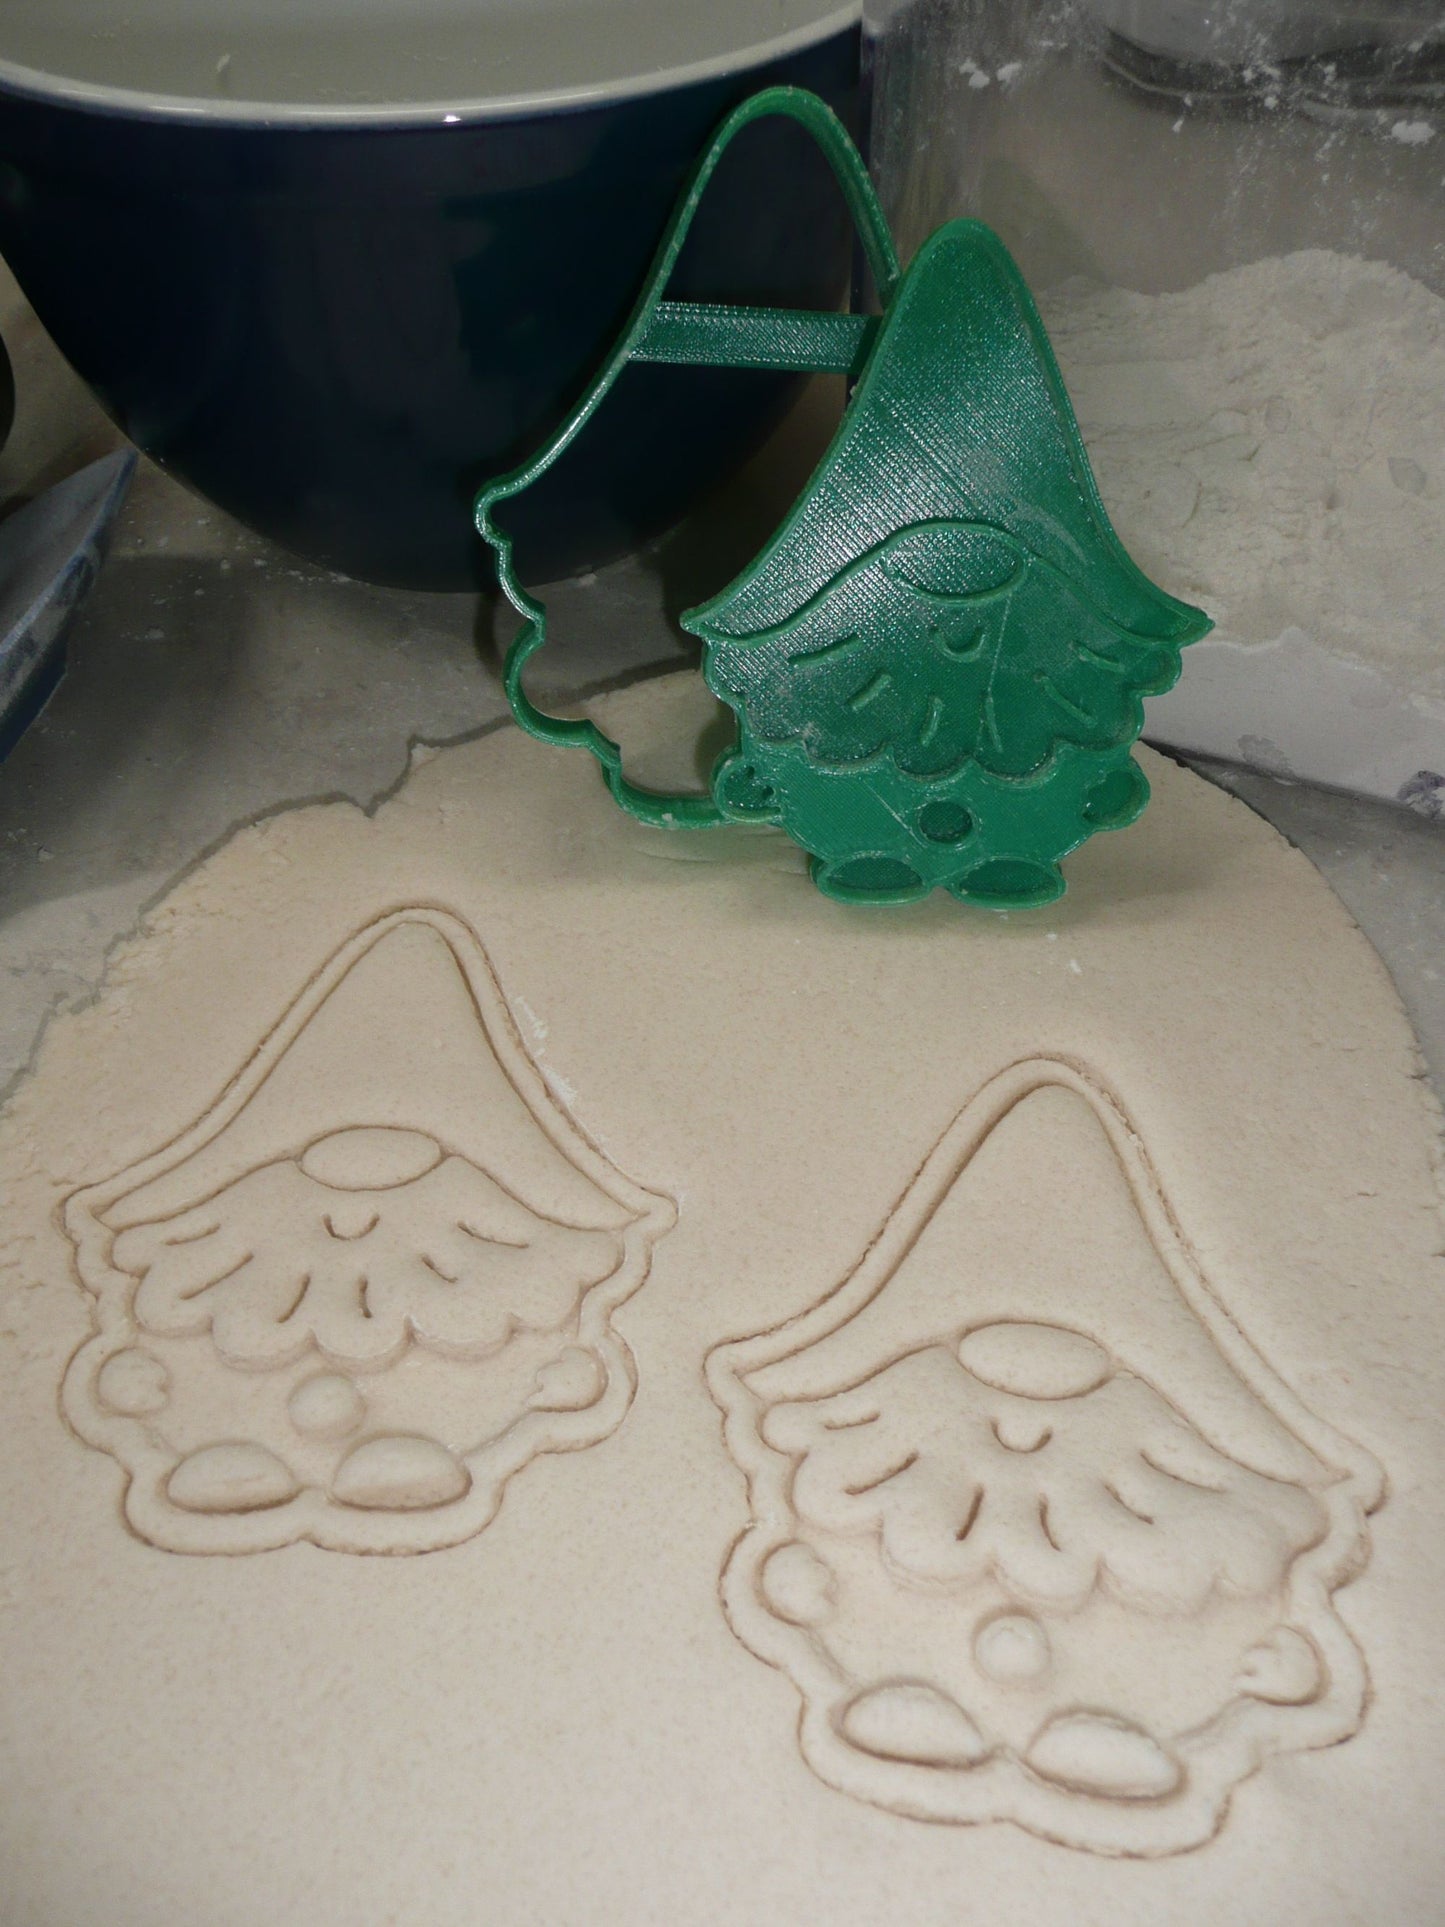 Gnome 2 Garden Mythical Creature Set Of 2 Cookie Cutter And Stamp PR1620